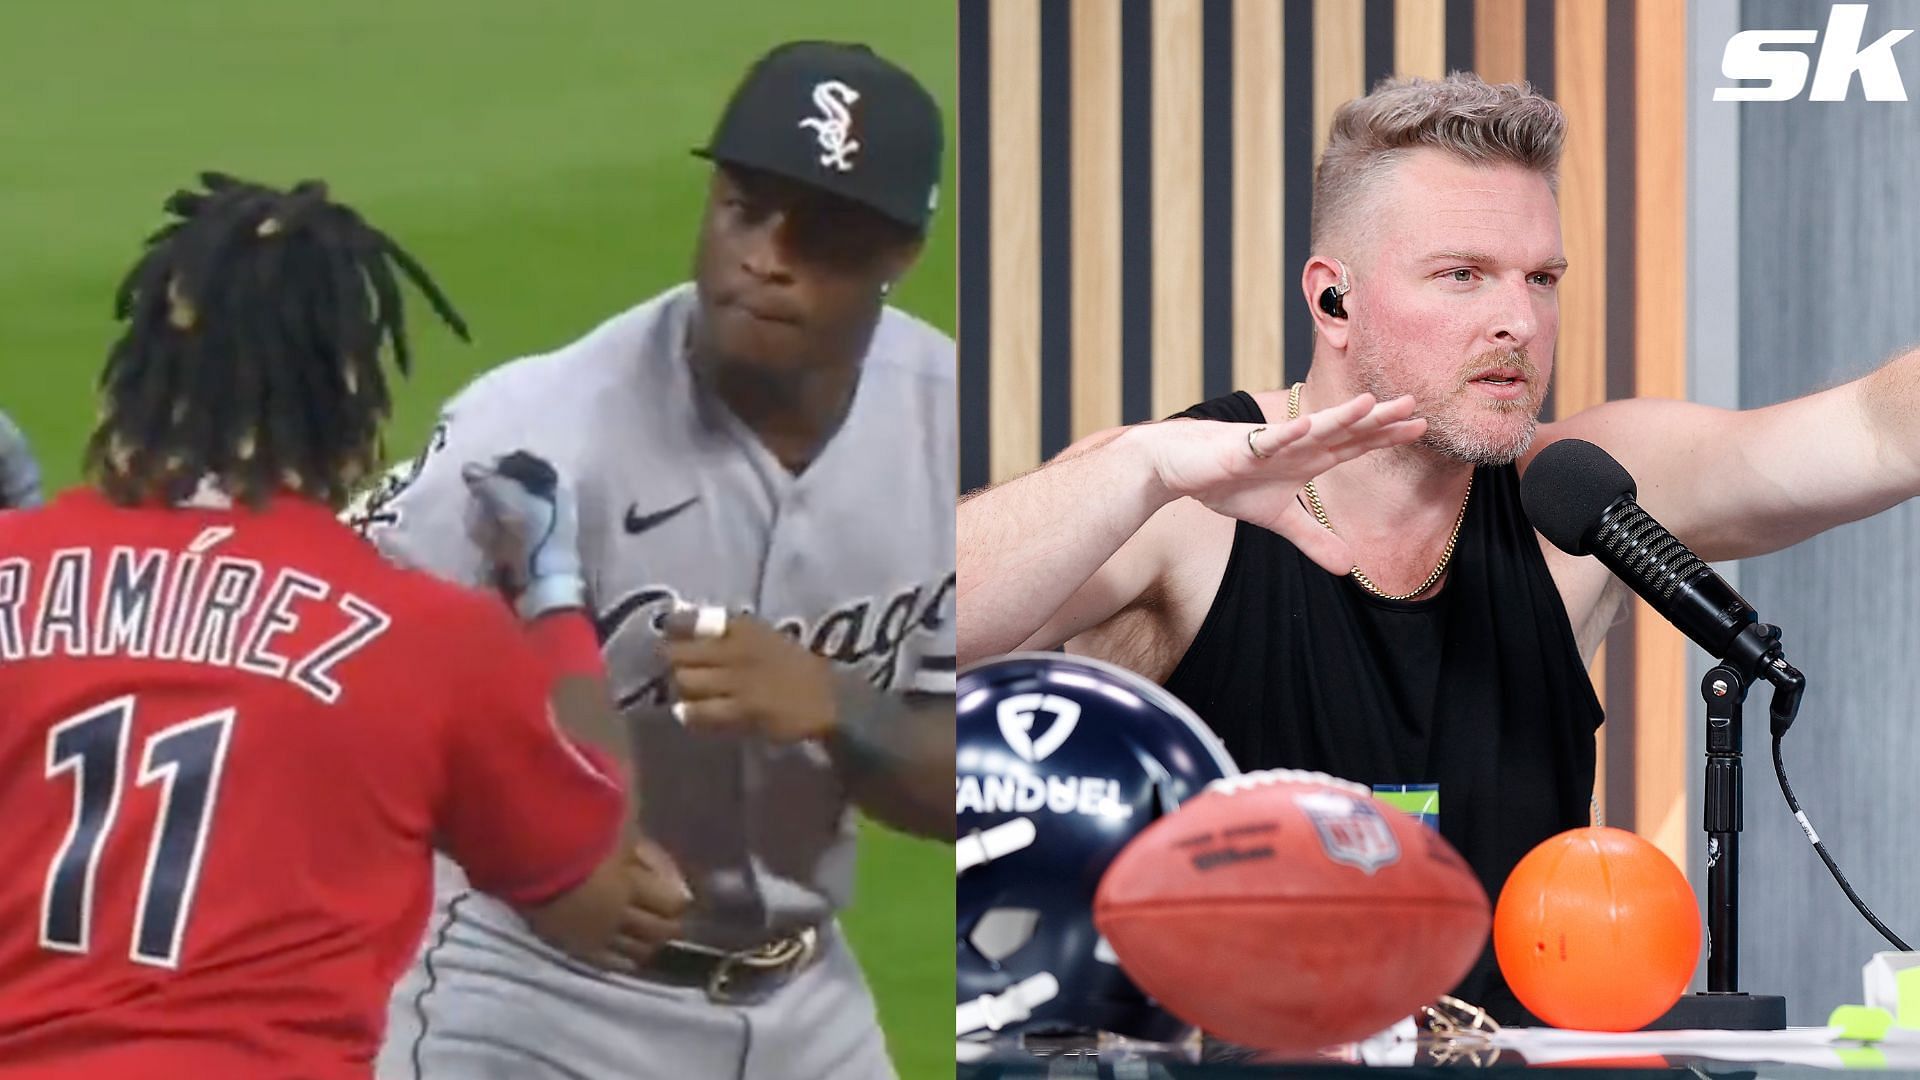 Pat McAfee drops colorful review of Jos&eacute; Ram&iacute;rez landing knockout punch on Tim Anderson